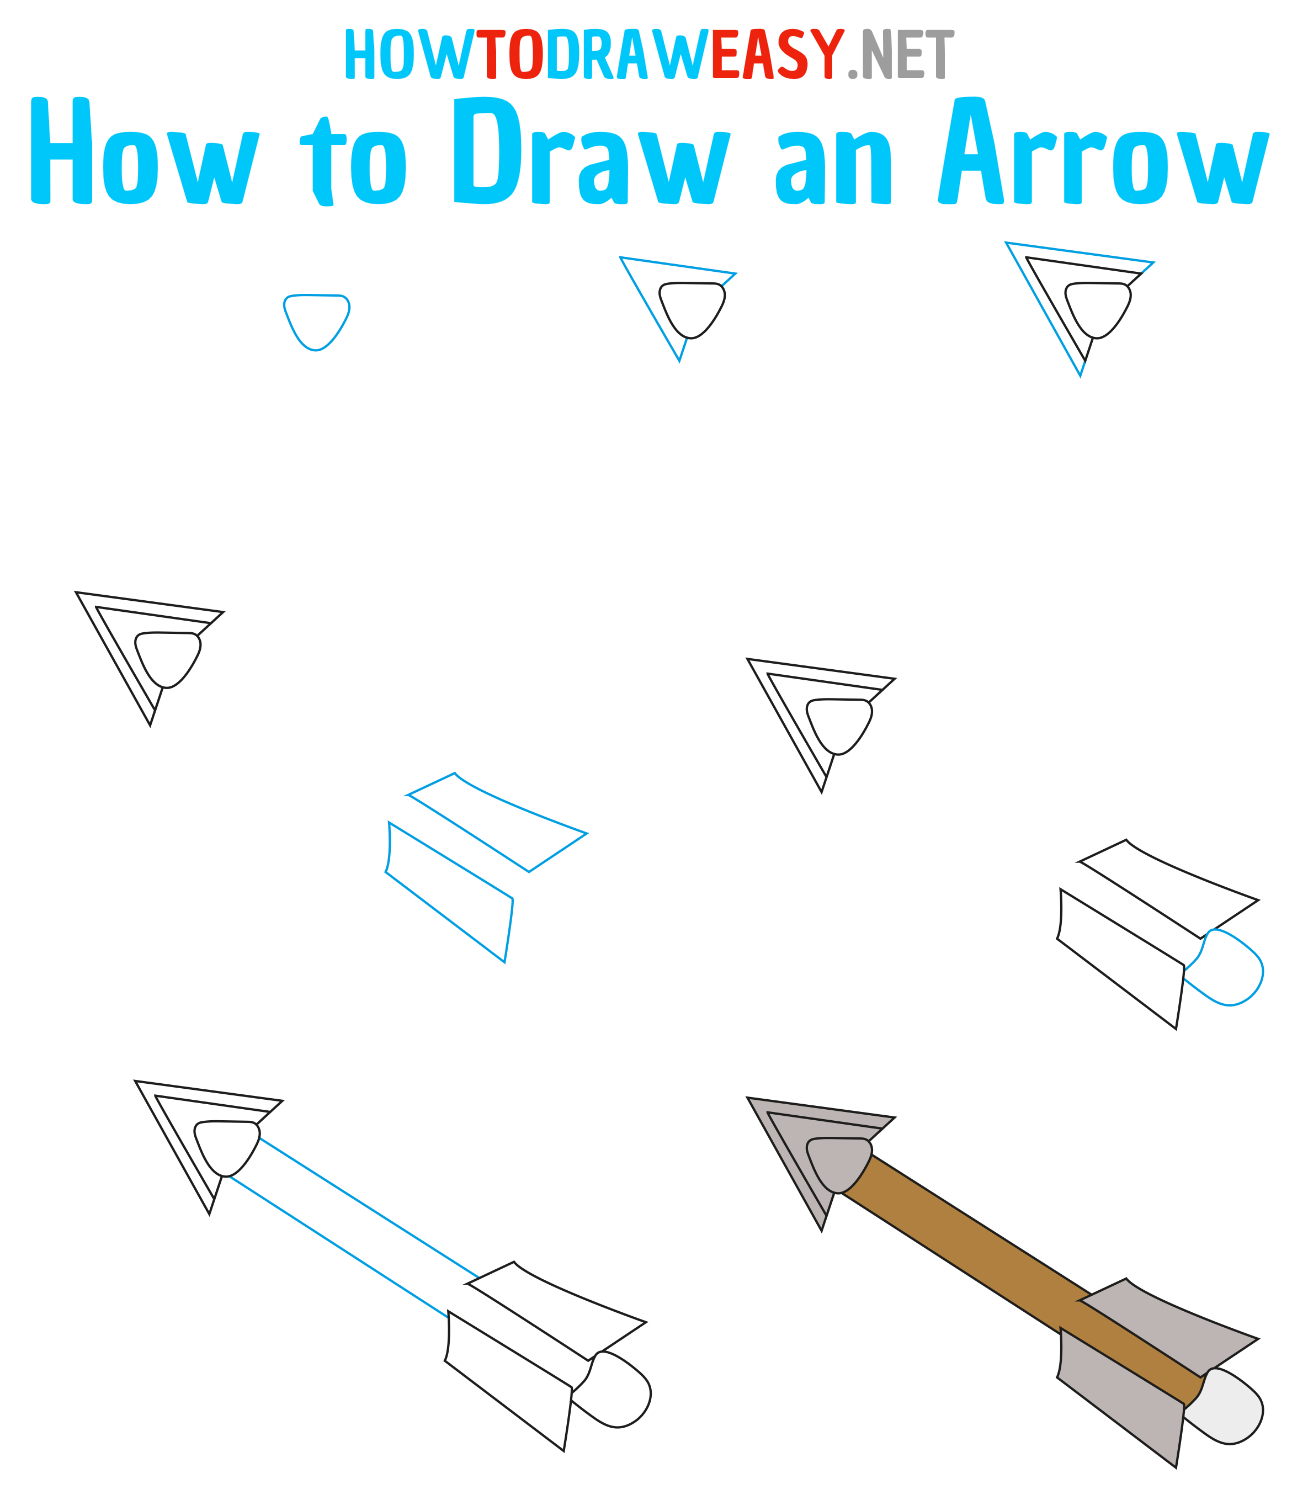 How to Draw an Arrow Step by Step